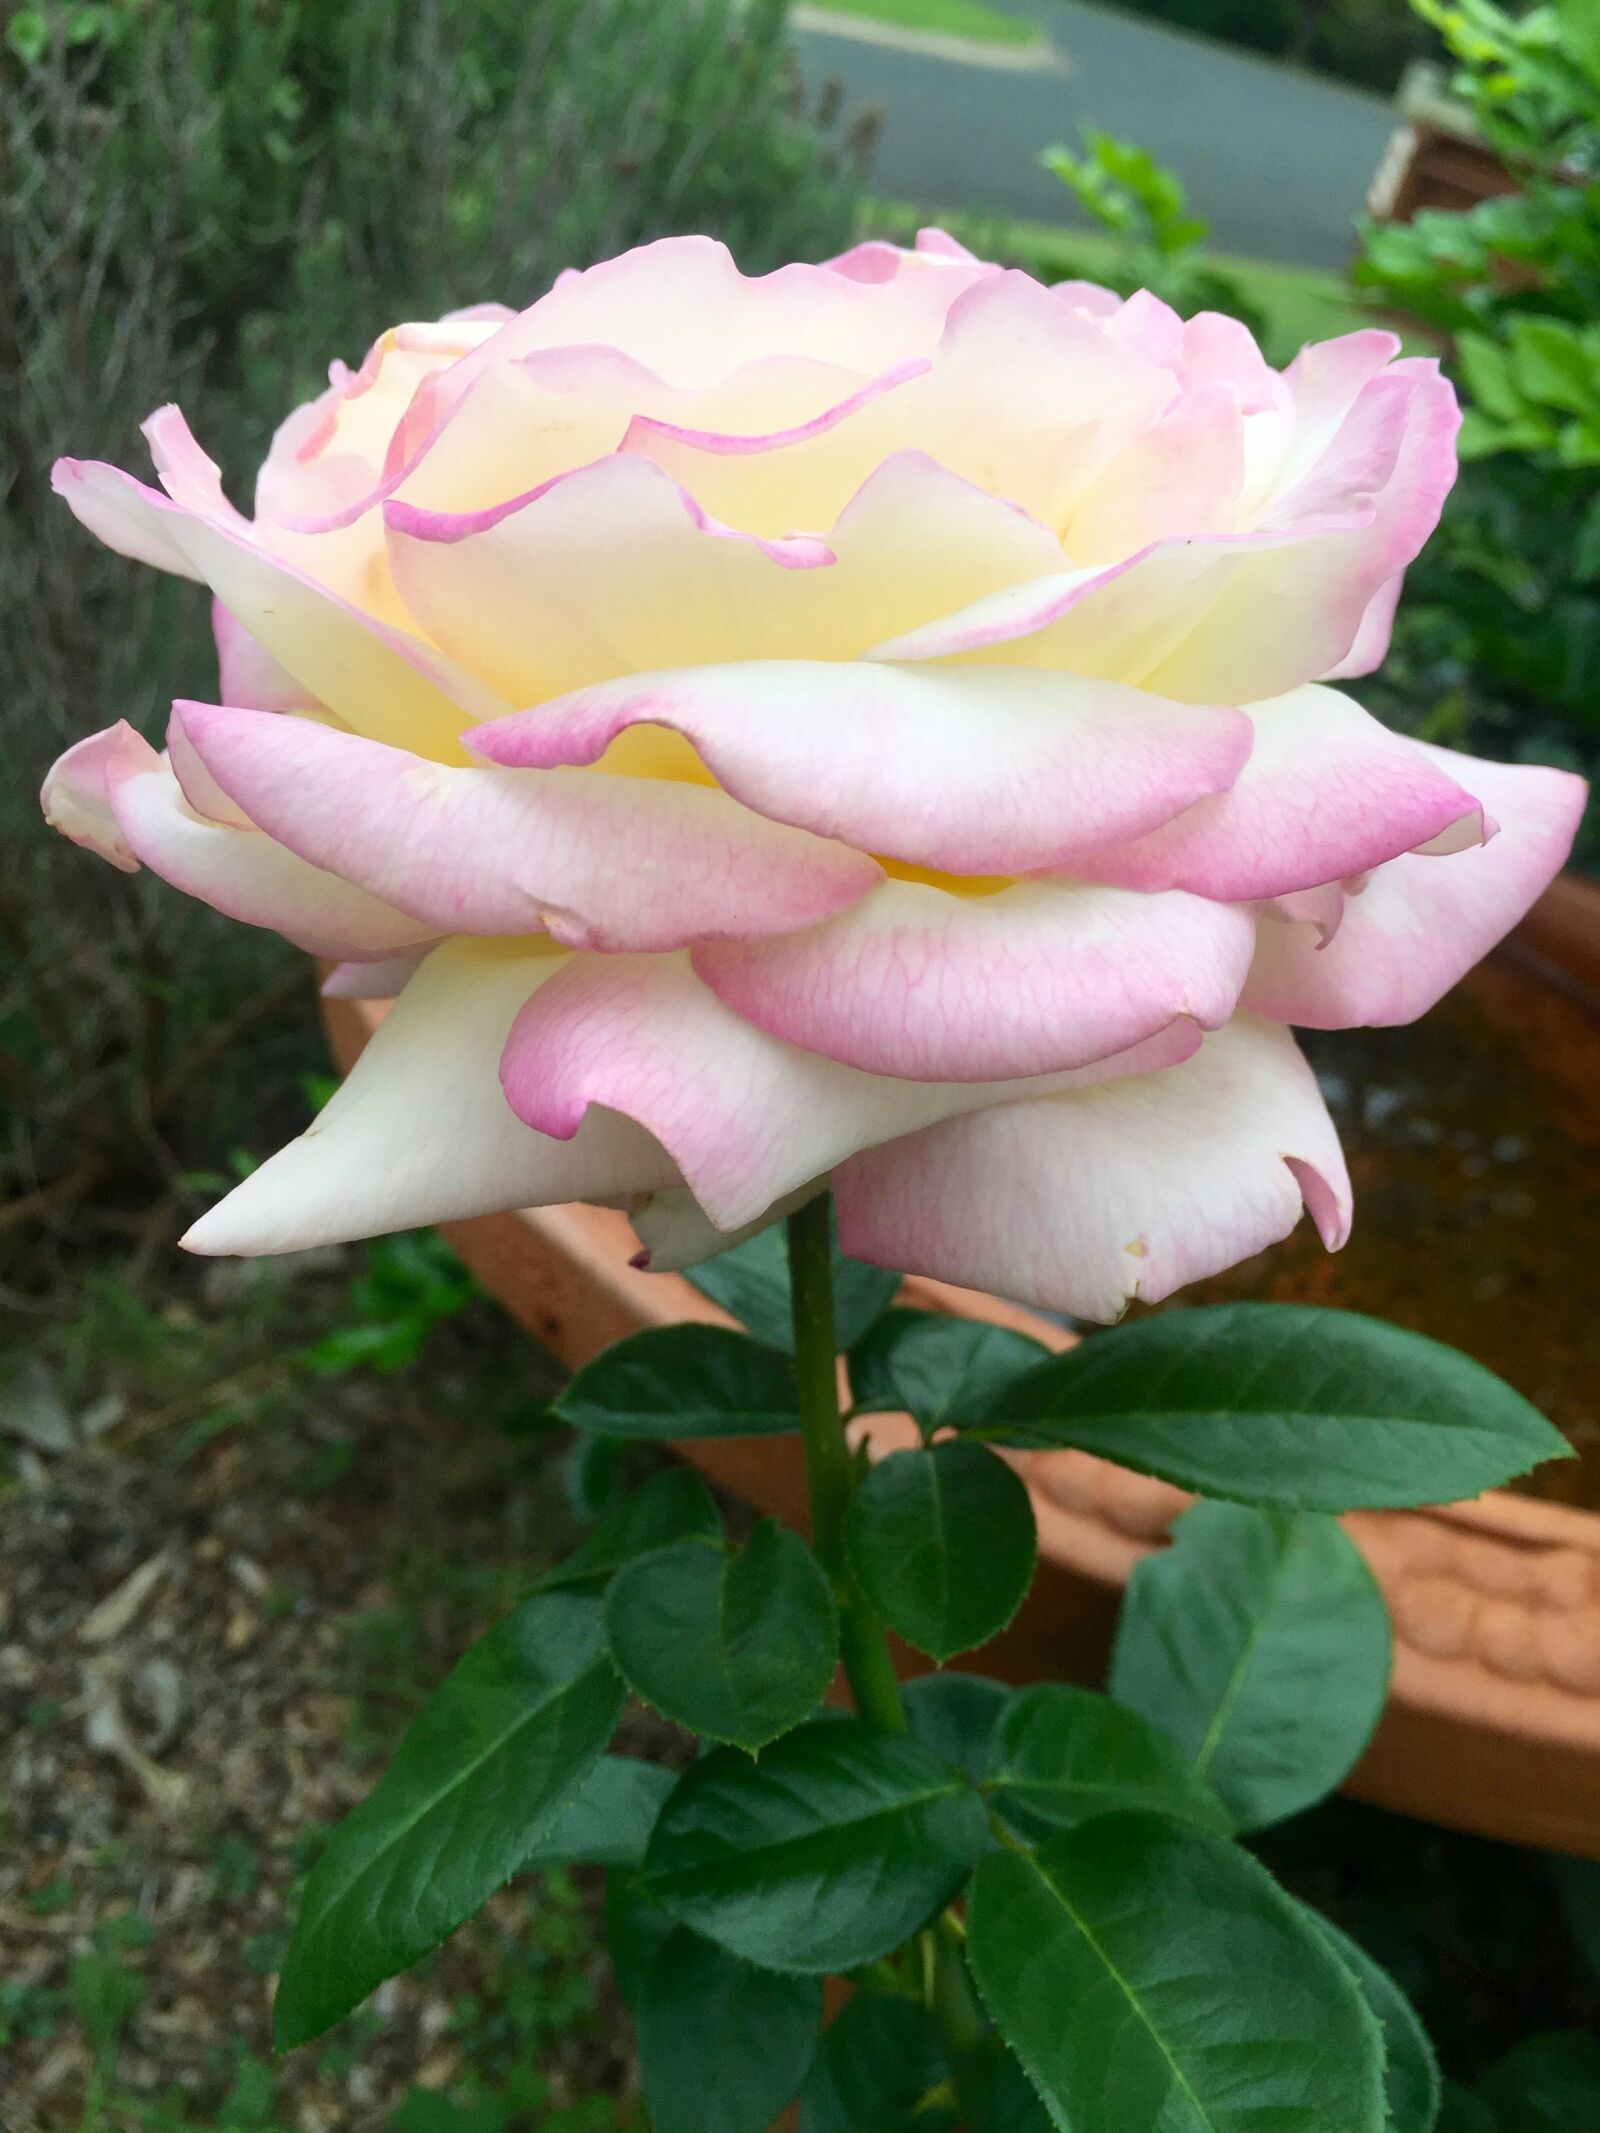 Apple iPhone 6 + iPhone 6 back camera 4.15mm f/2.2 sample photo. Rose, peace rose, nature photography